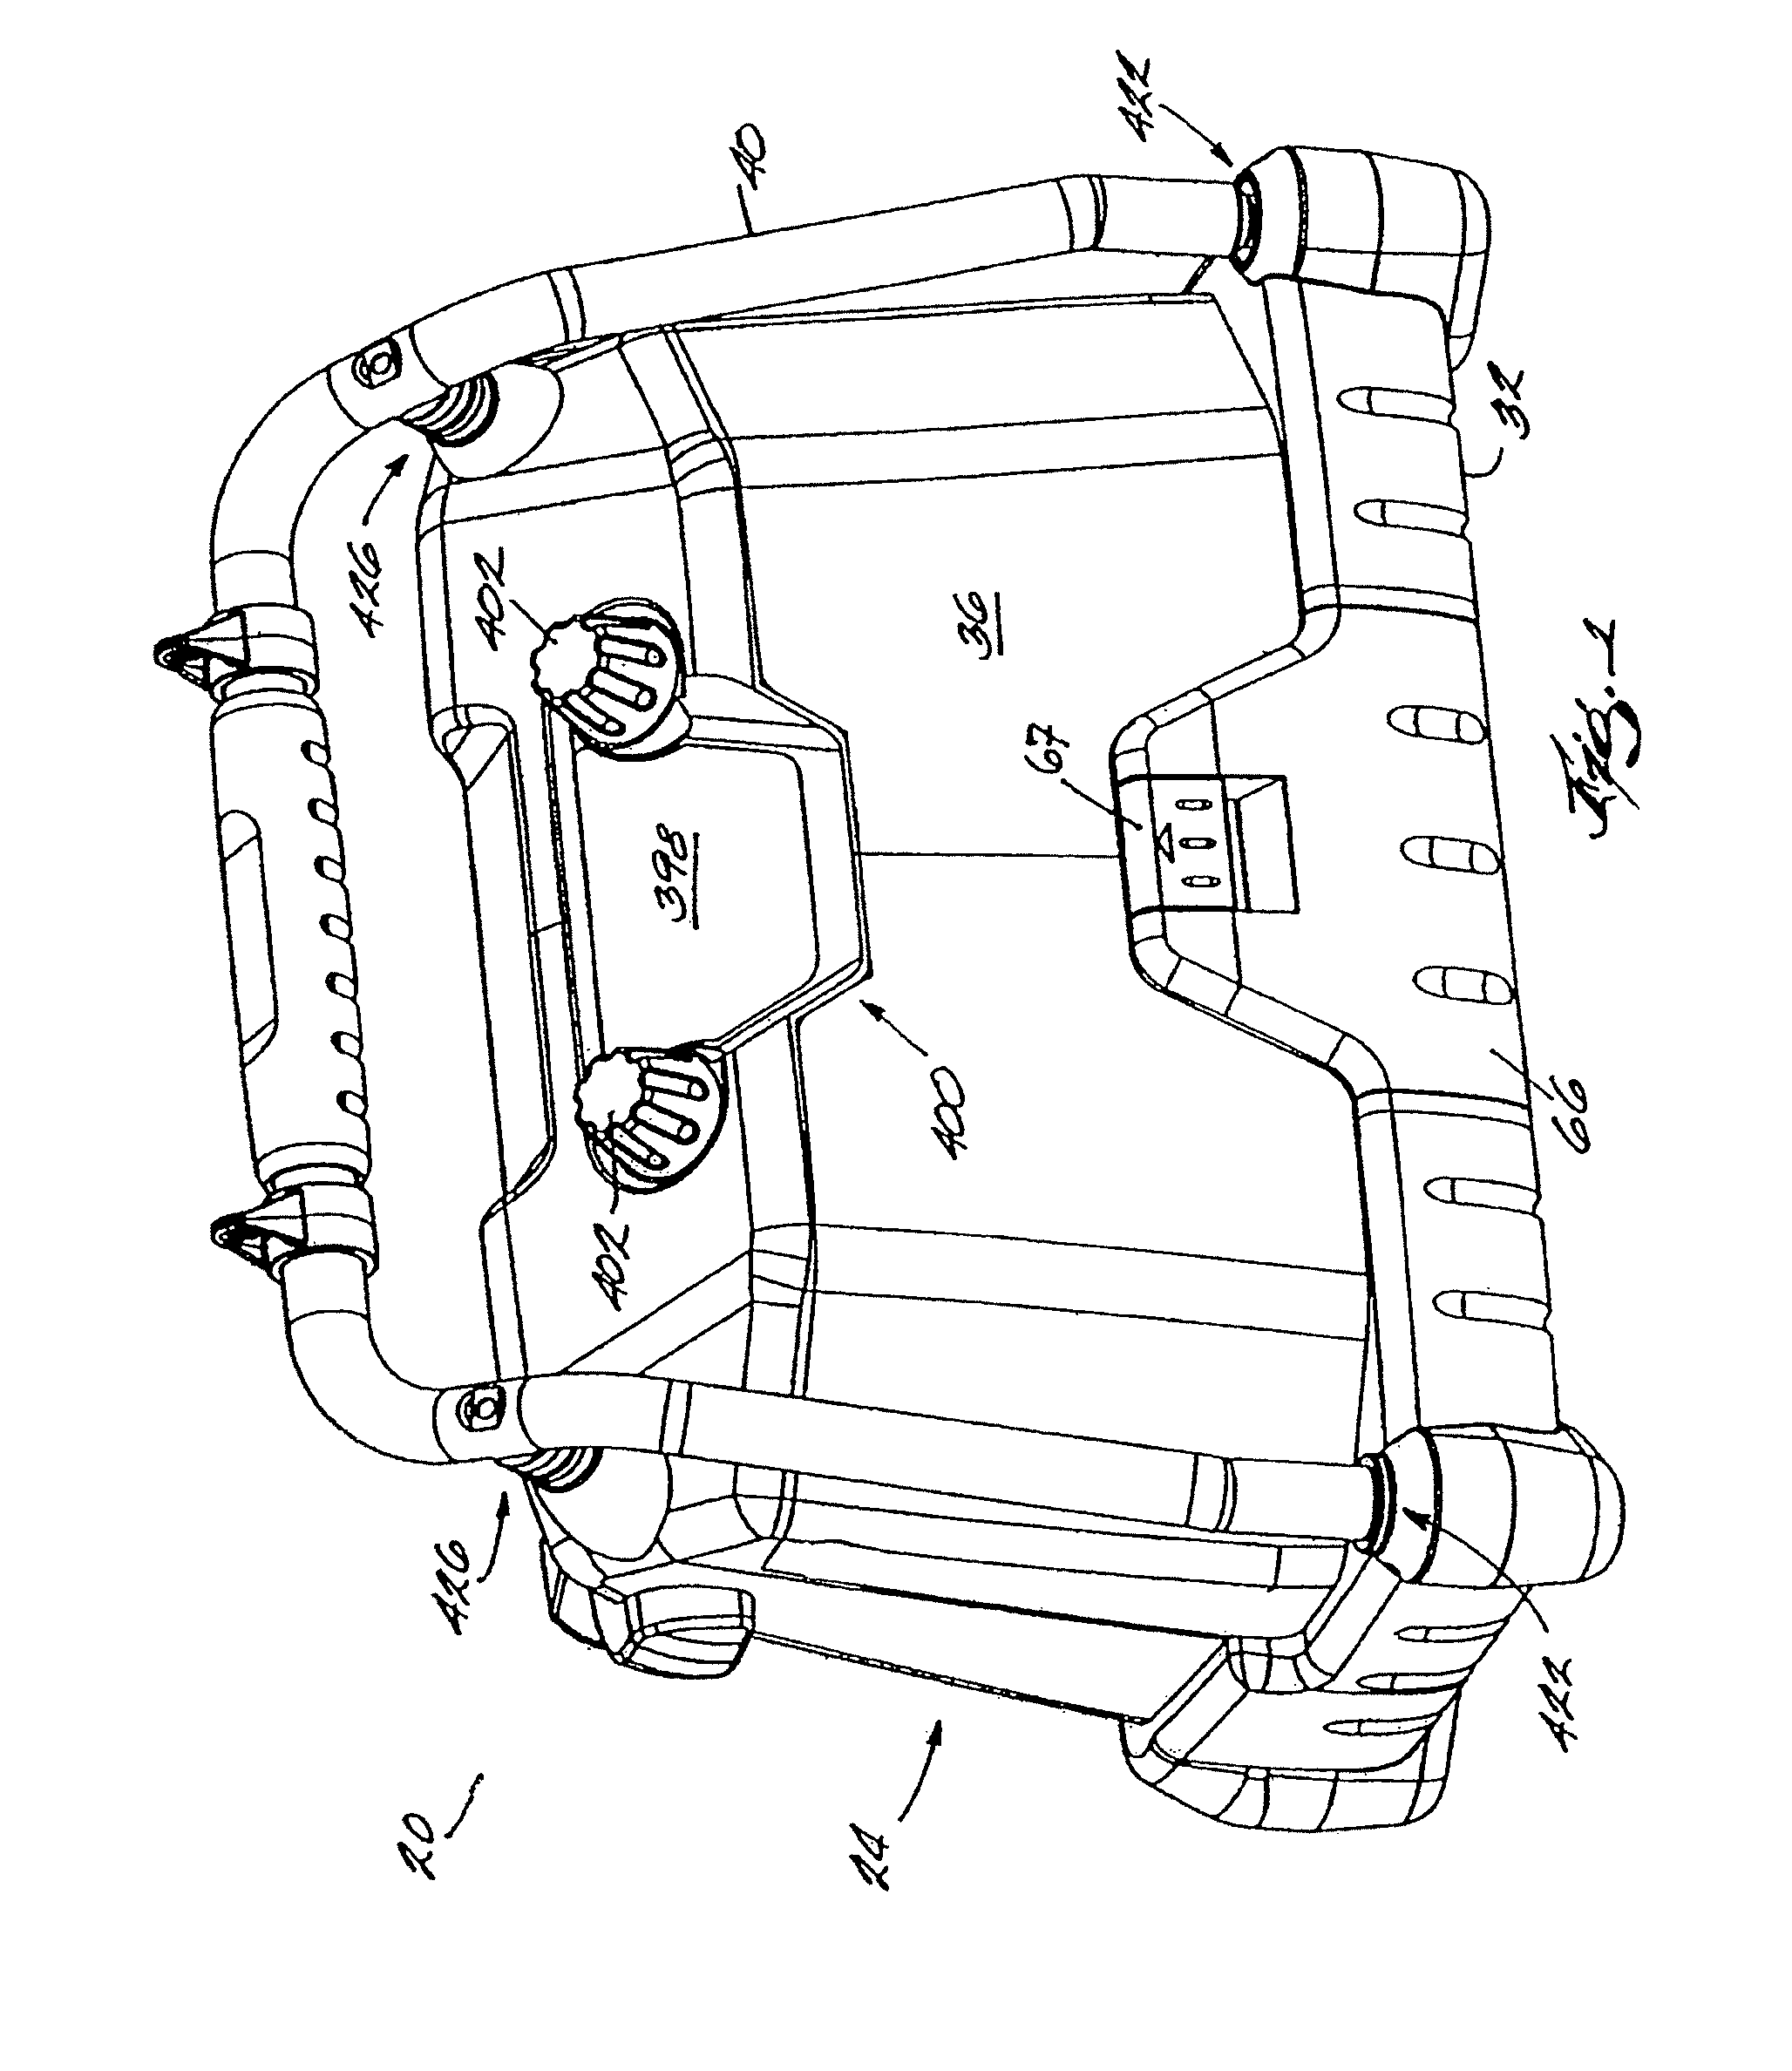 Electrical component having a selectively connectable battery charger